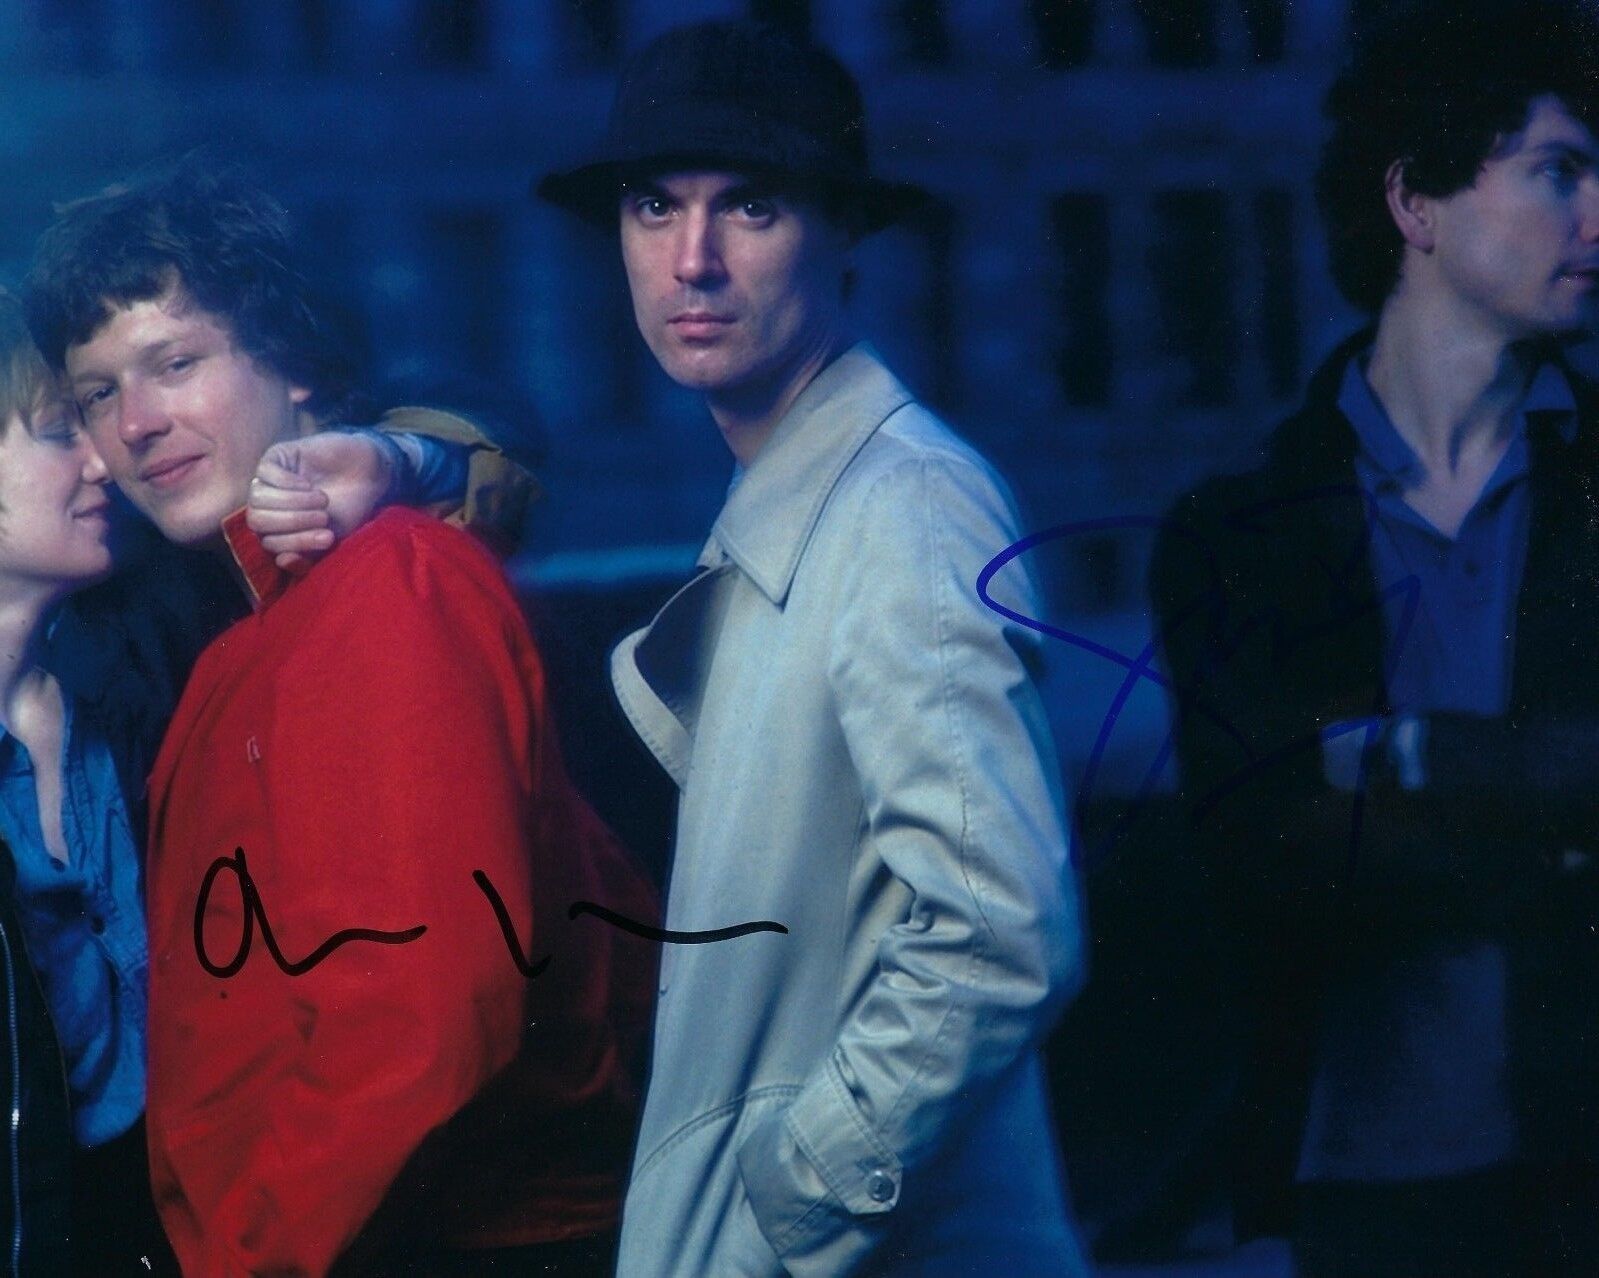 GFA Talking Heads Band * DAVID BYRNE & JERRY HARRISON * Signed 8x10 Photo Poster painting COA